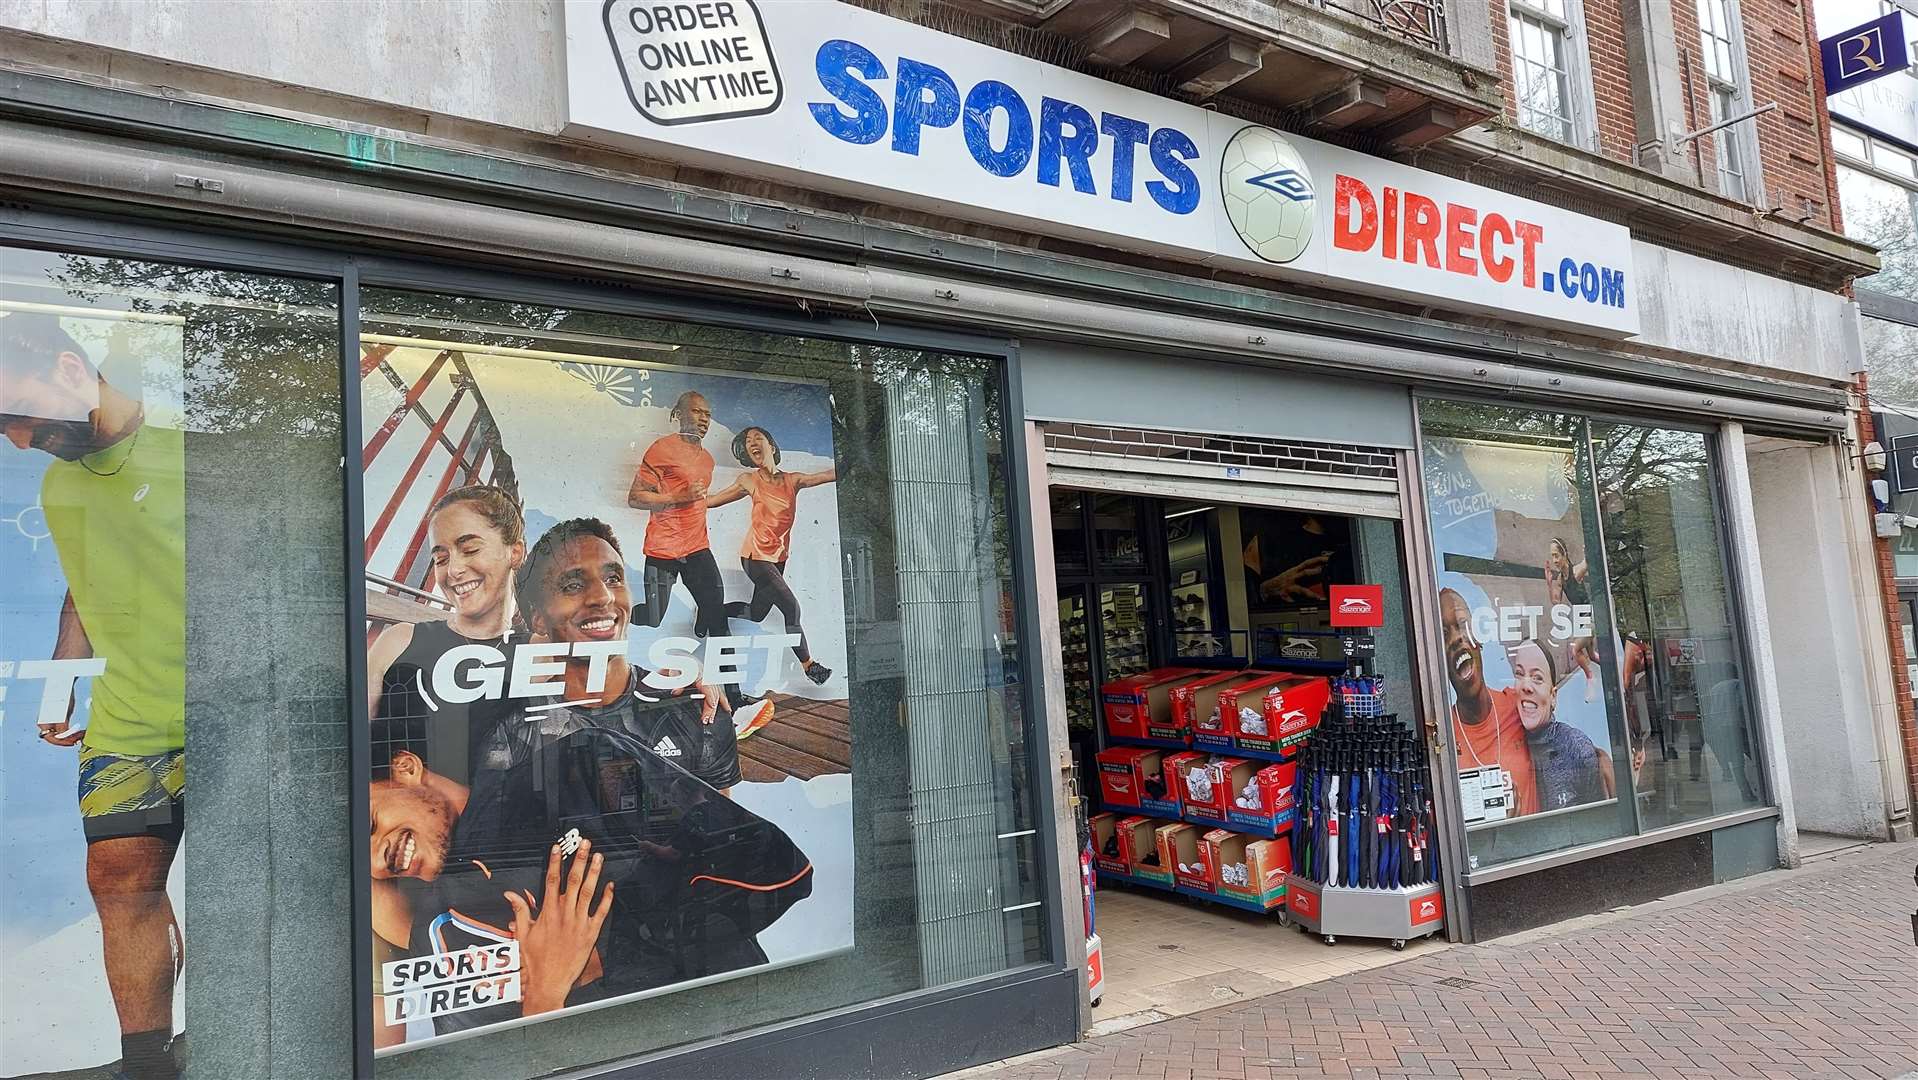 Game will move to a new spot inside Sports Direct